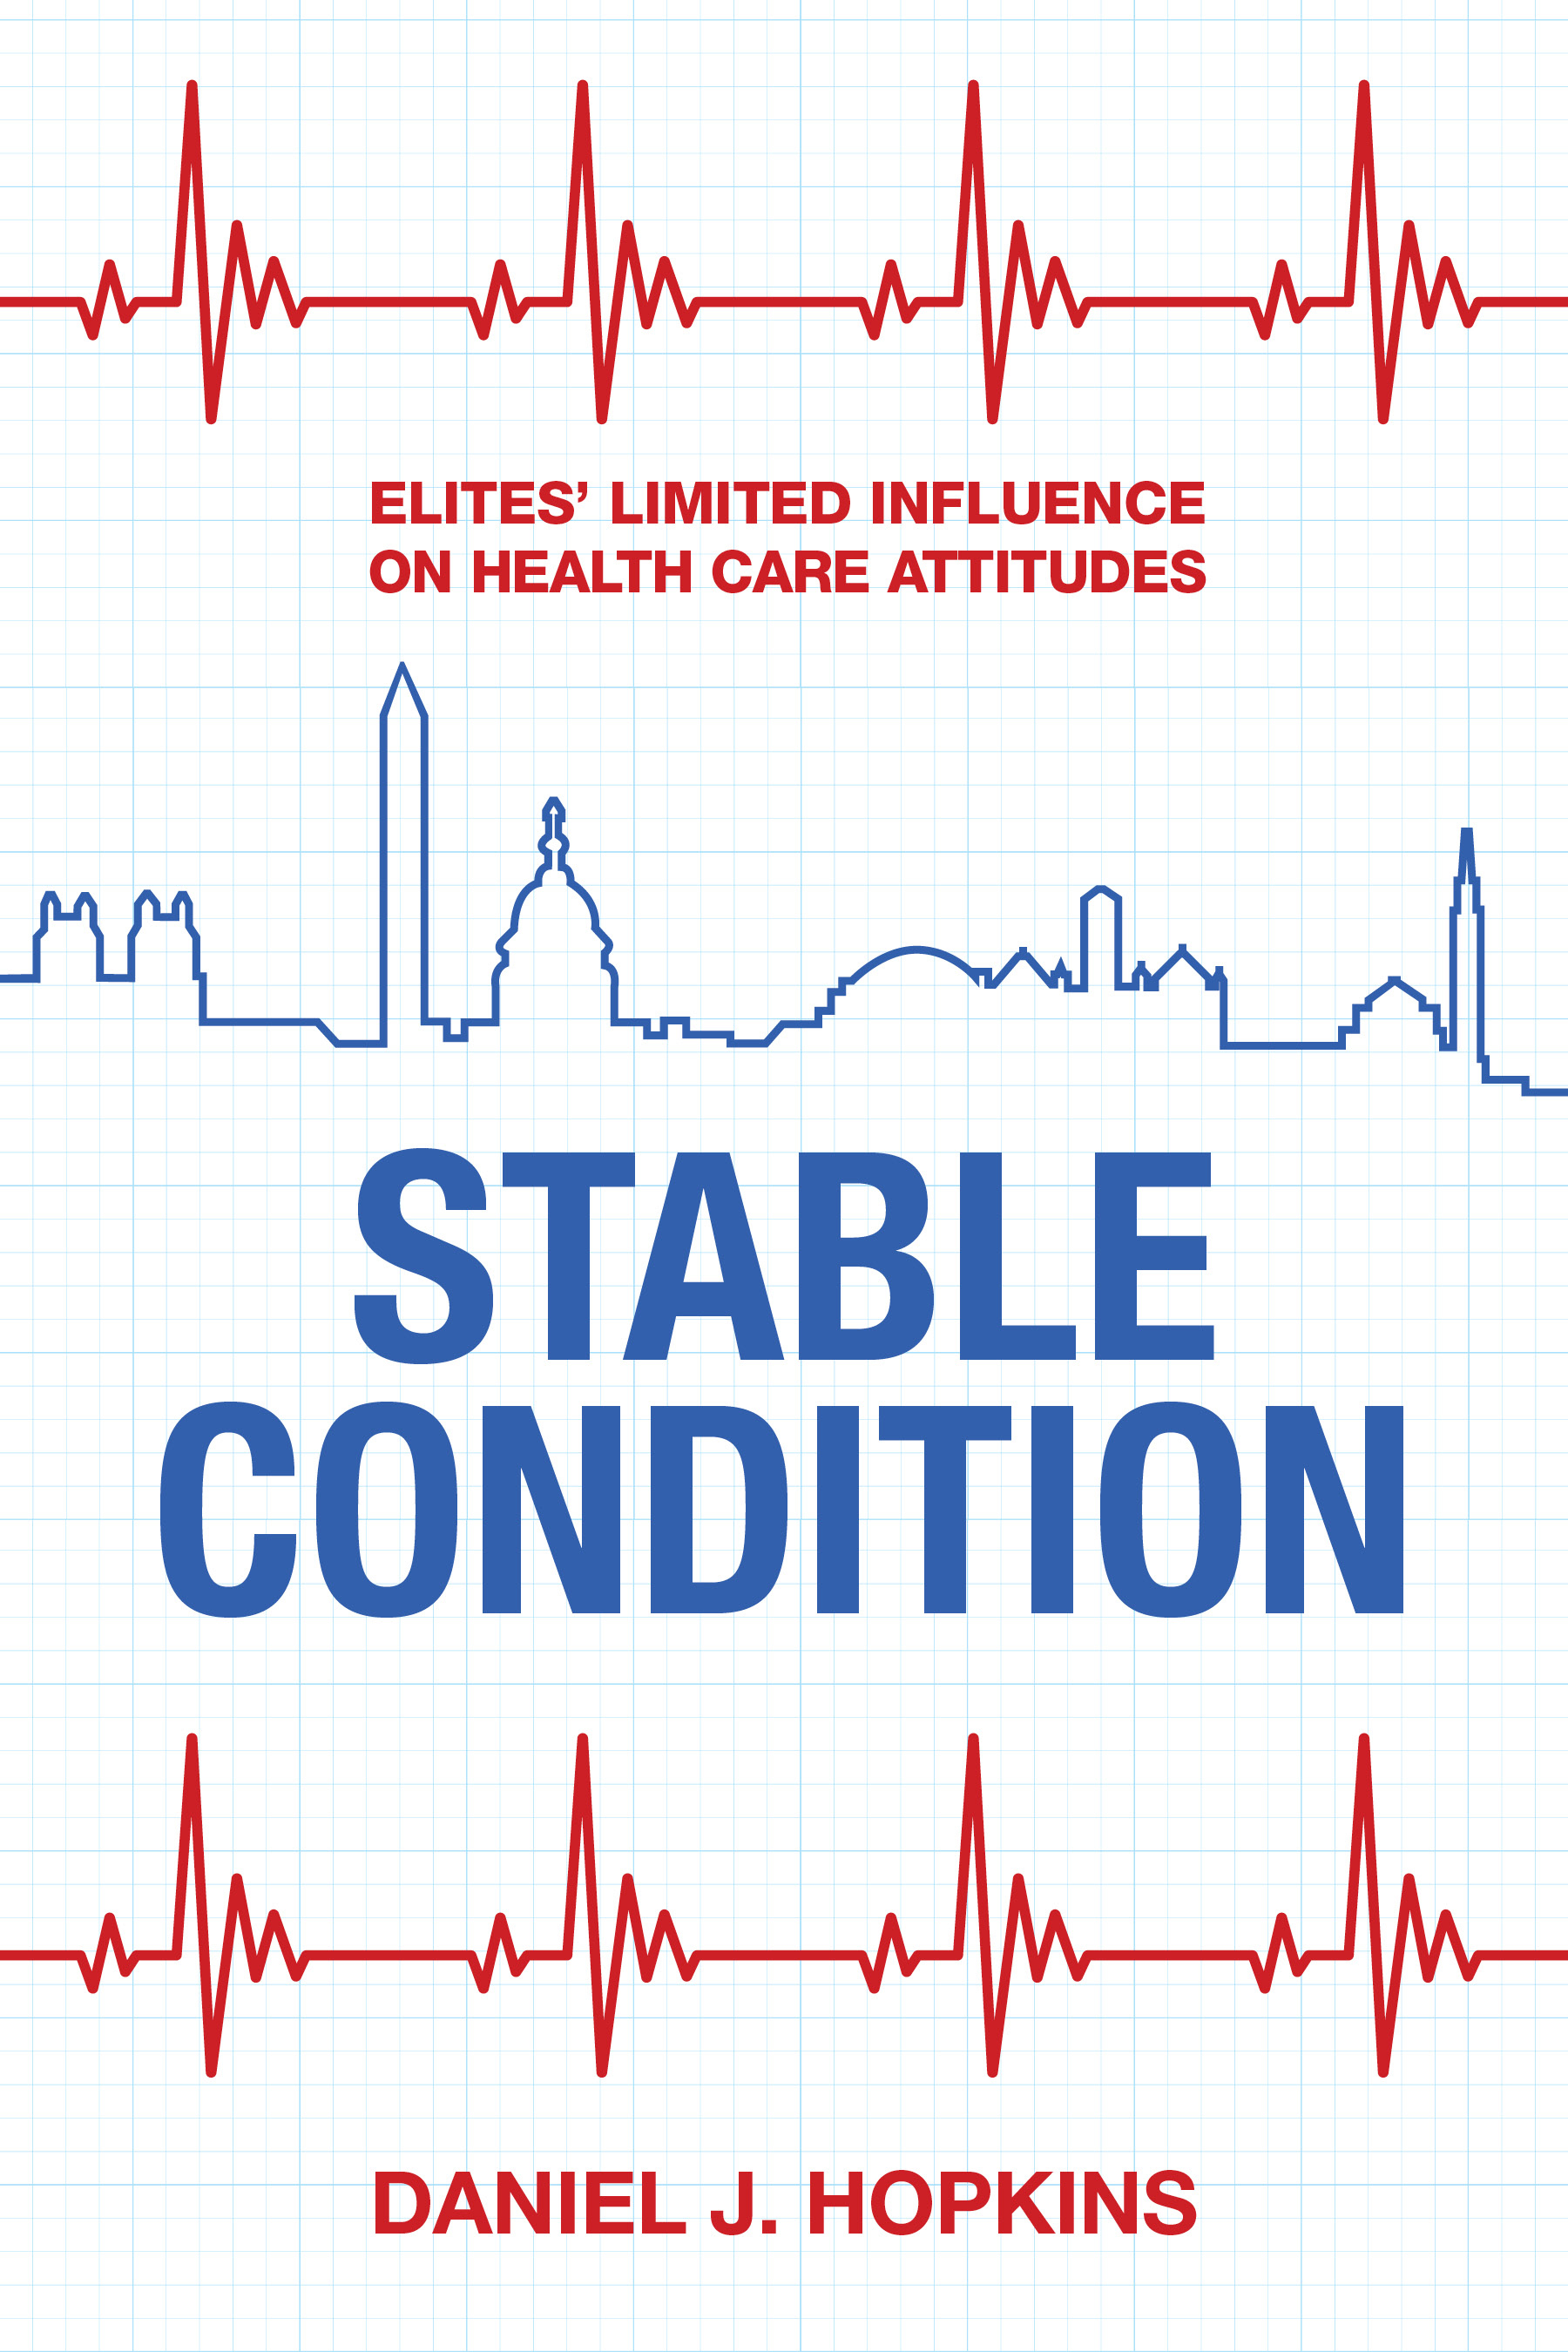 Cover of new book by Daniel J. Hopkins called "Stable Condition."